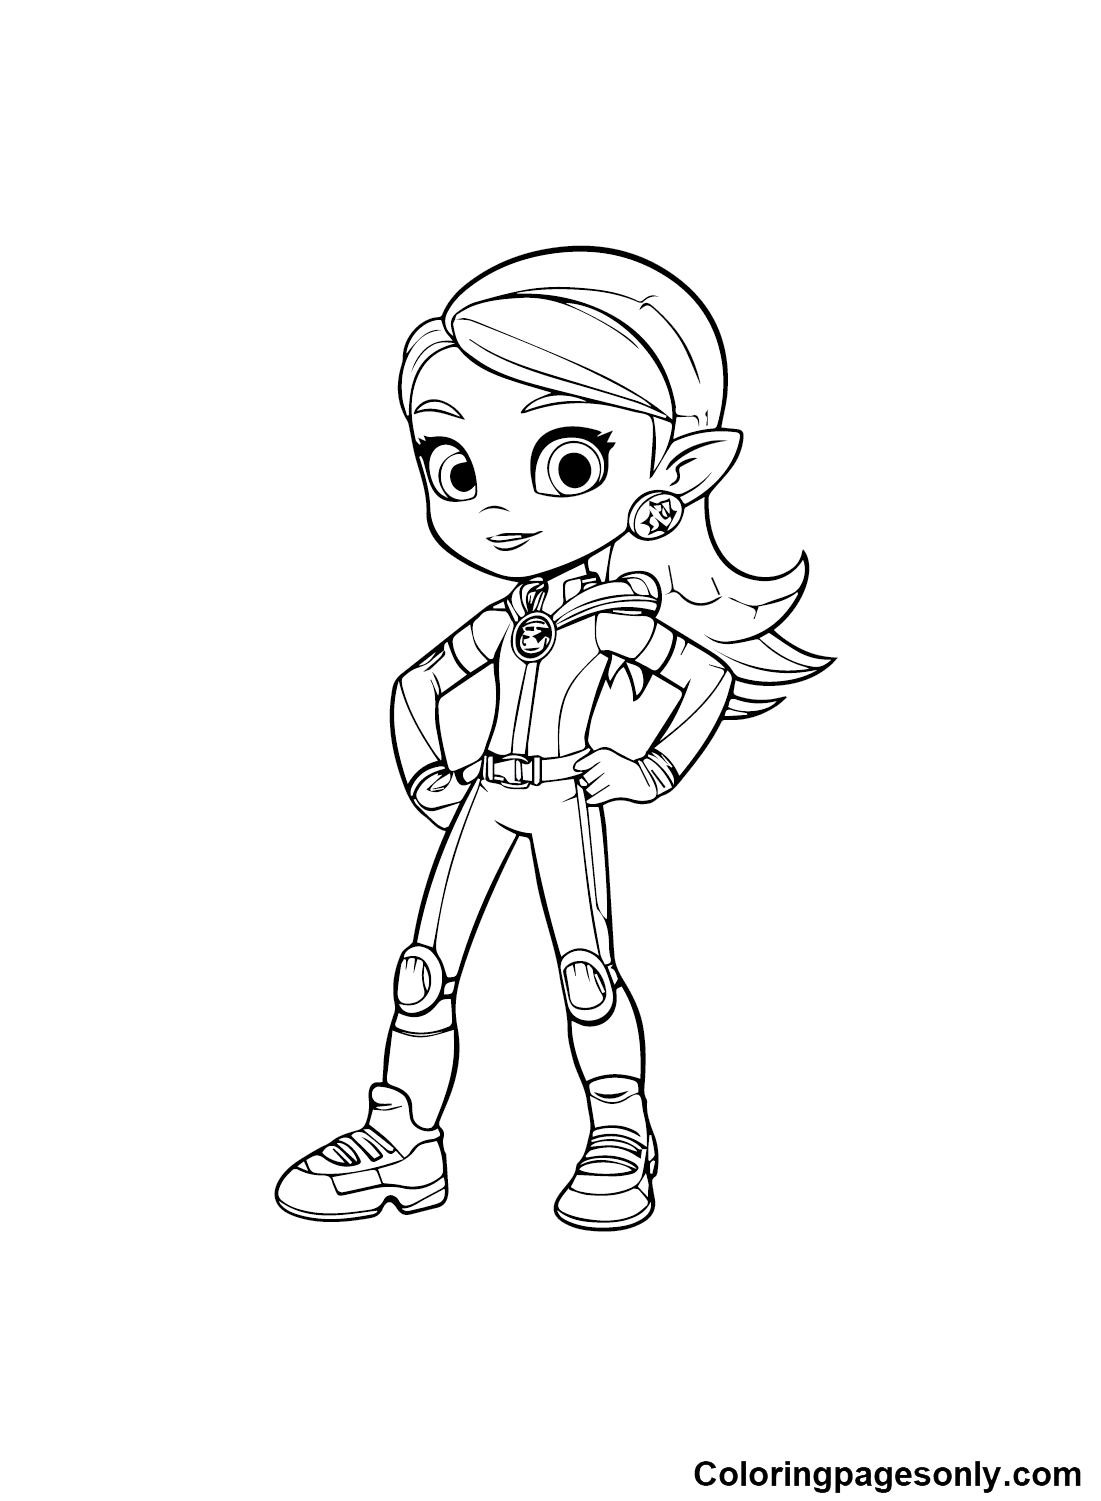 Rainbow Rangers Images to Print Coloring Pages